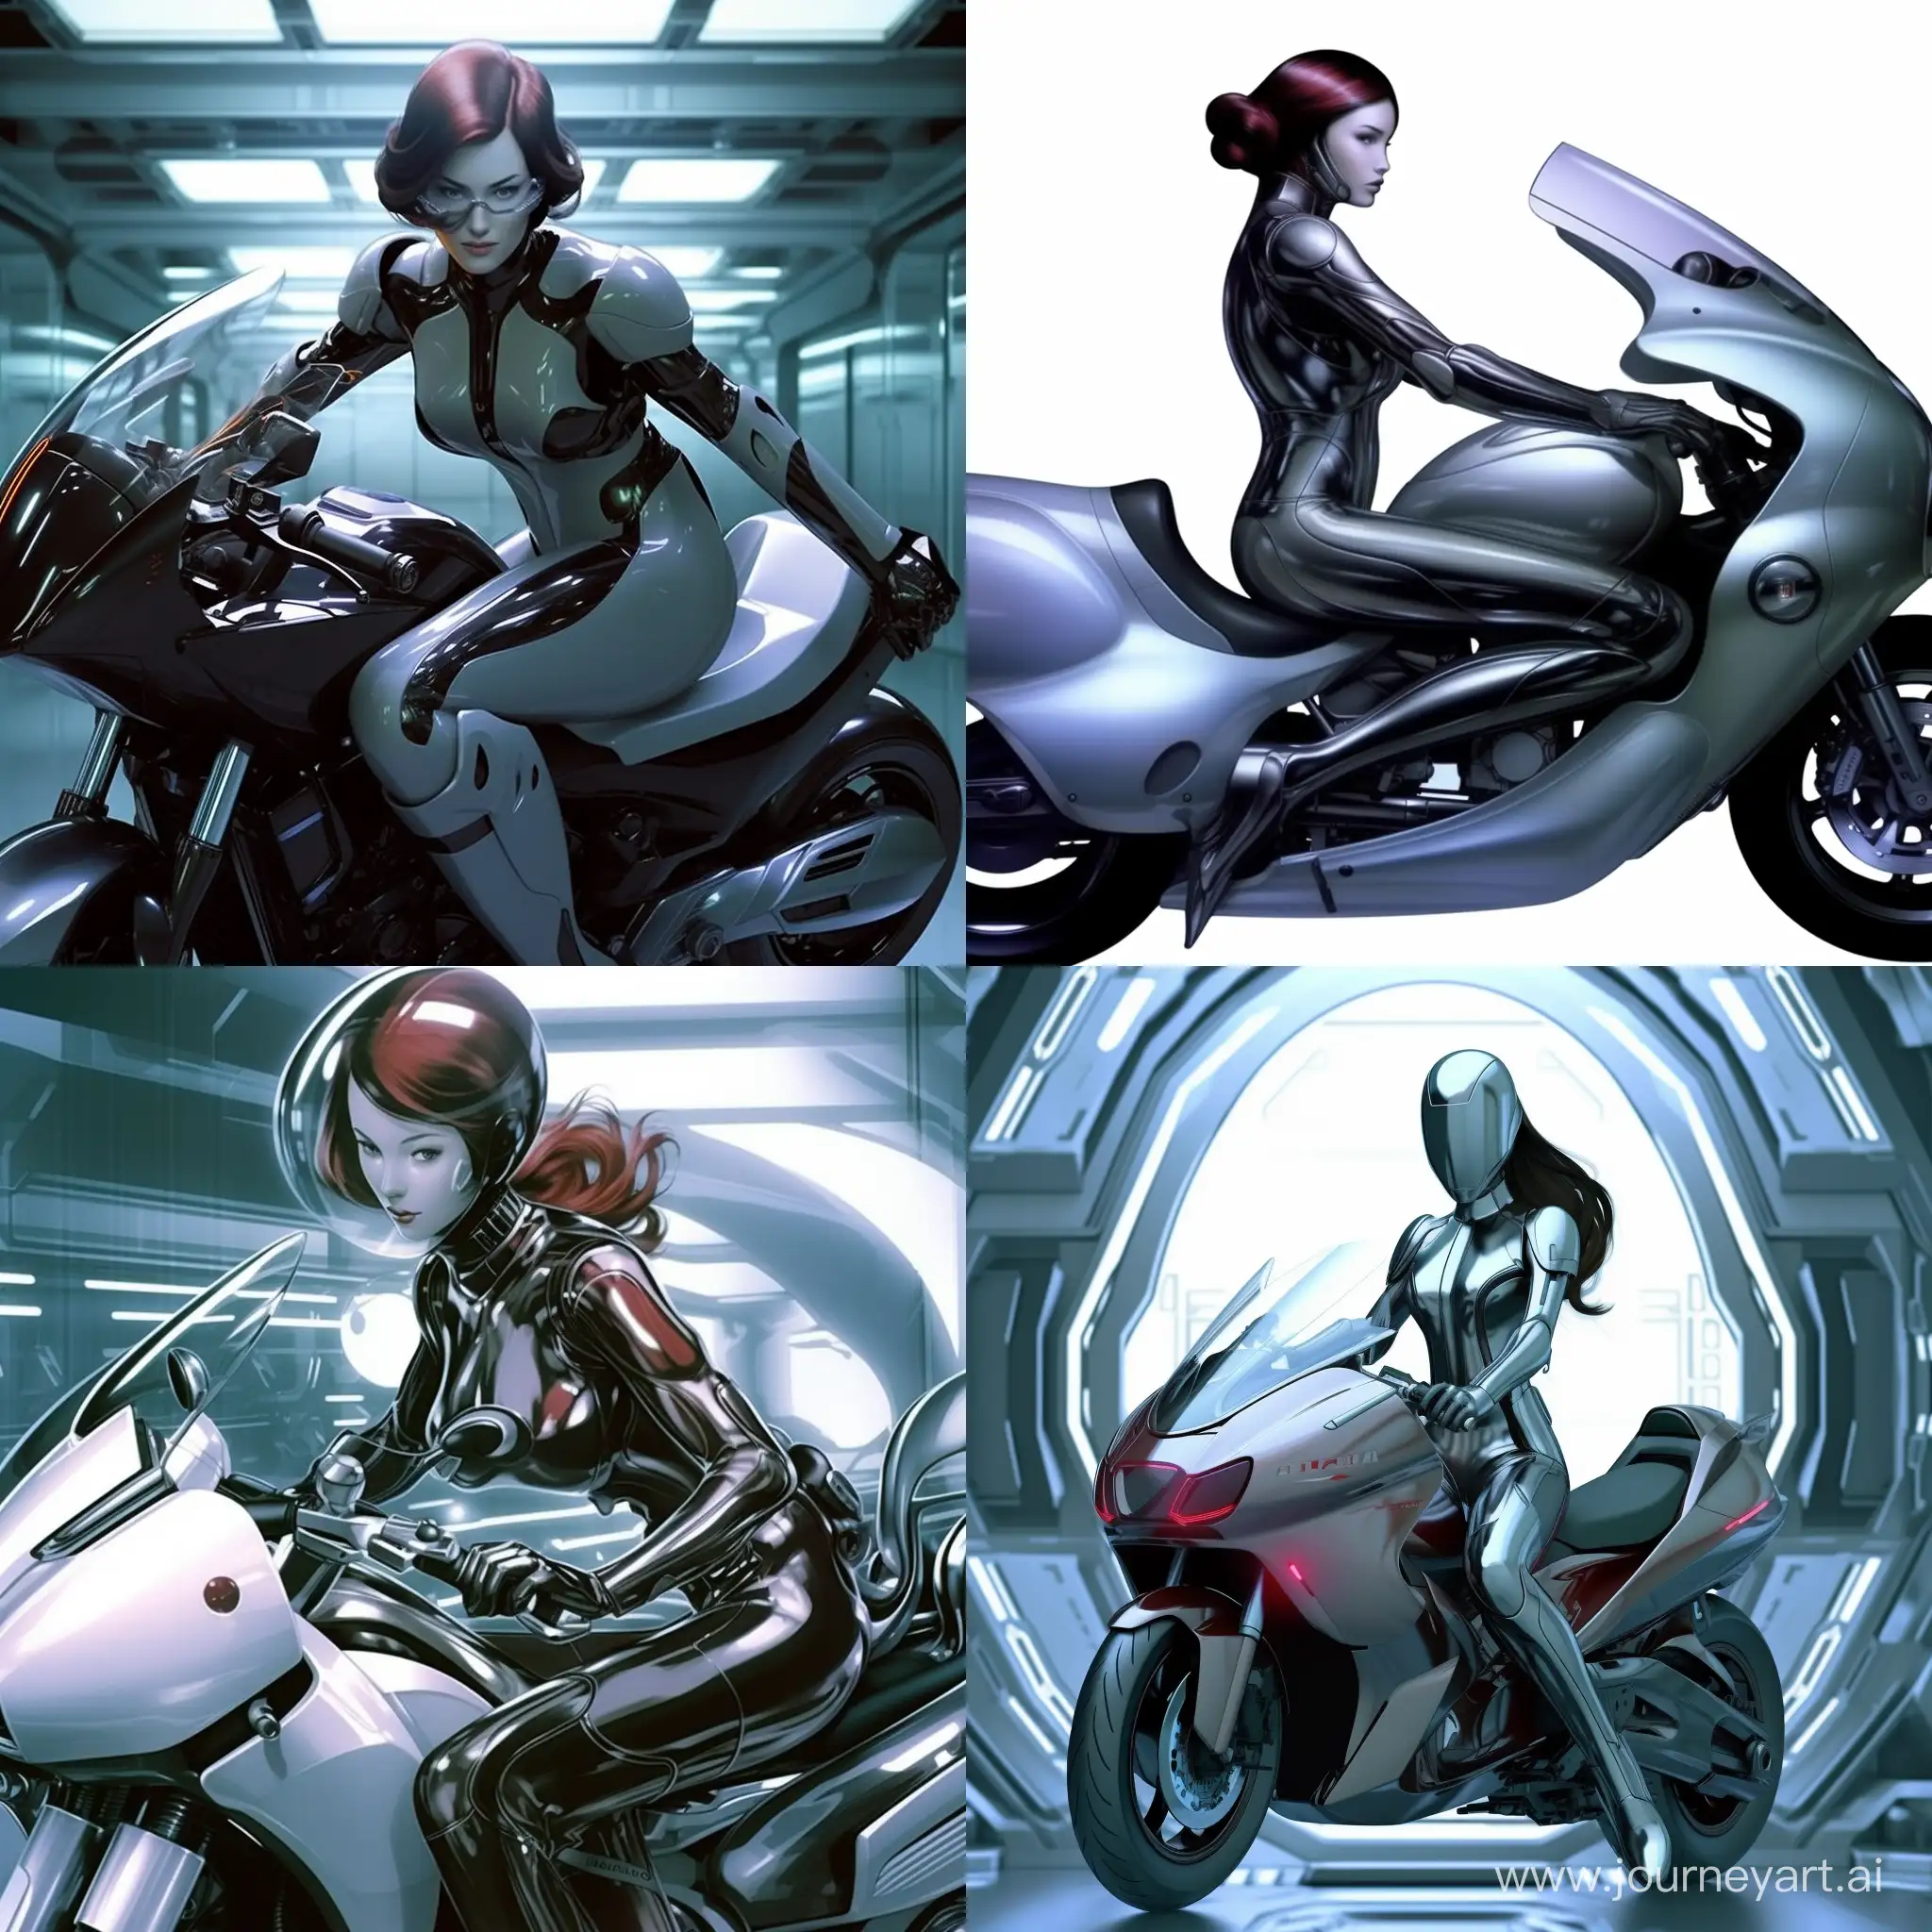 Woman in a latex suit on a futuristic motorcycle, futuristic Japanese tech